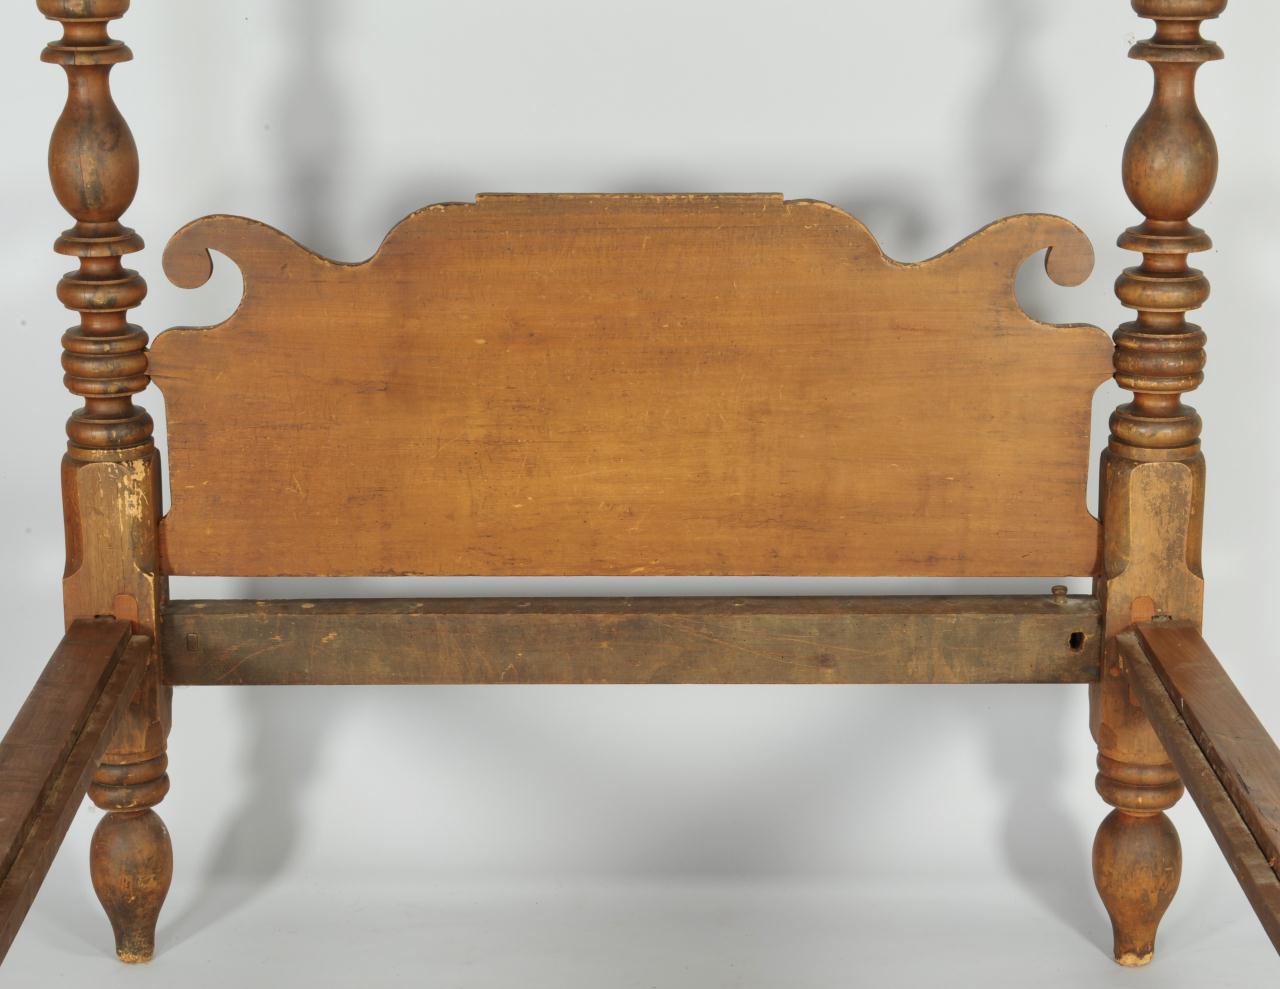 Lot 112: Southern High Post Tester Bed